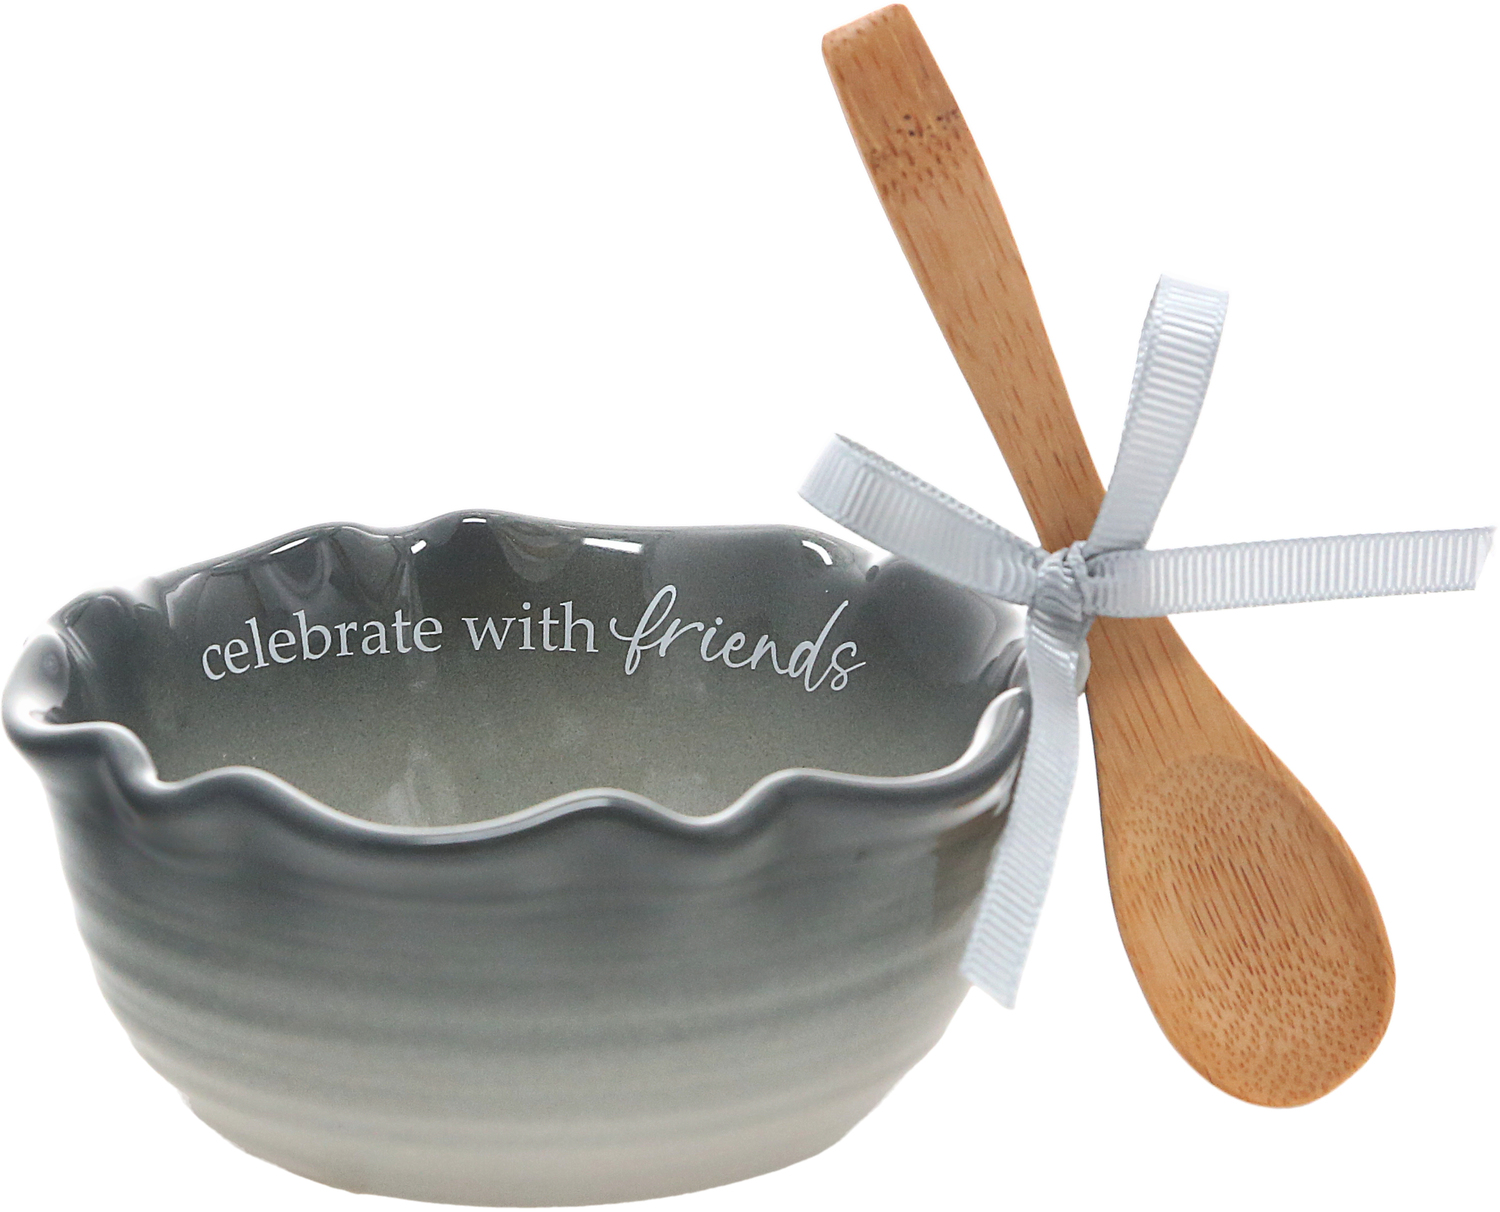 Friends by Thoughts of Home - Friends - 4.5" Ceramic Bowl with Bamboo Spoon